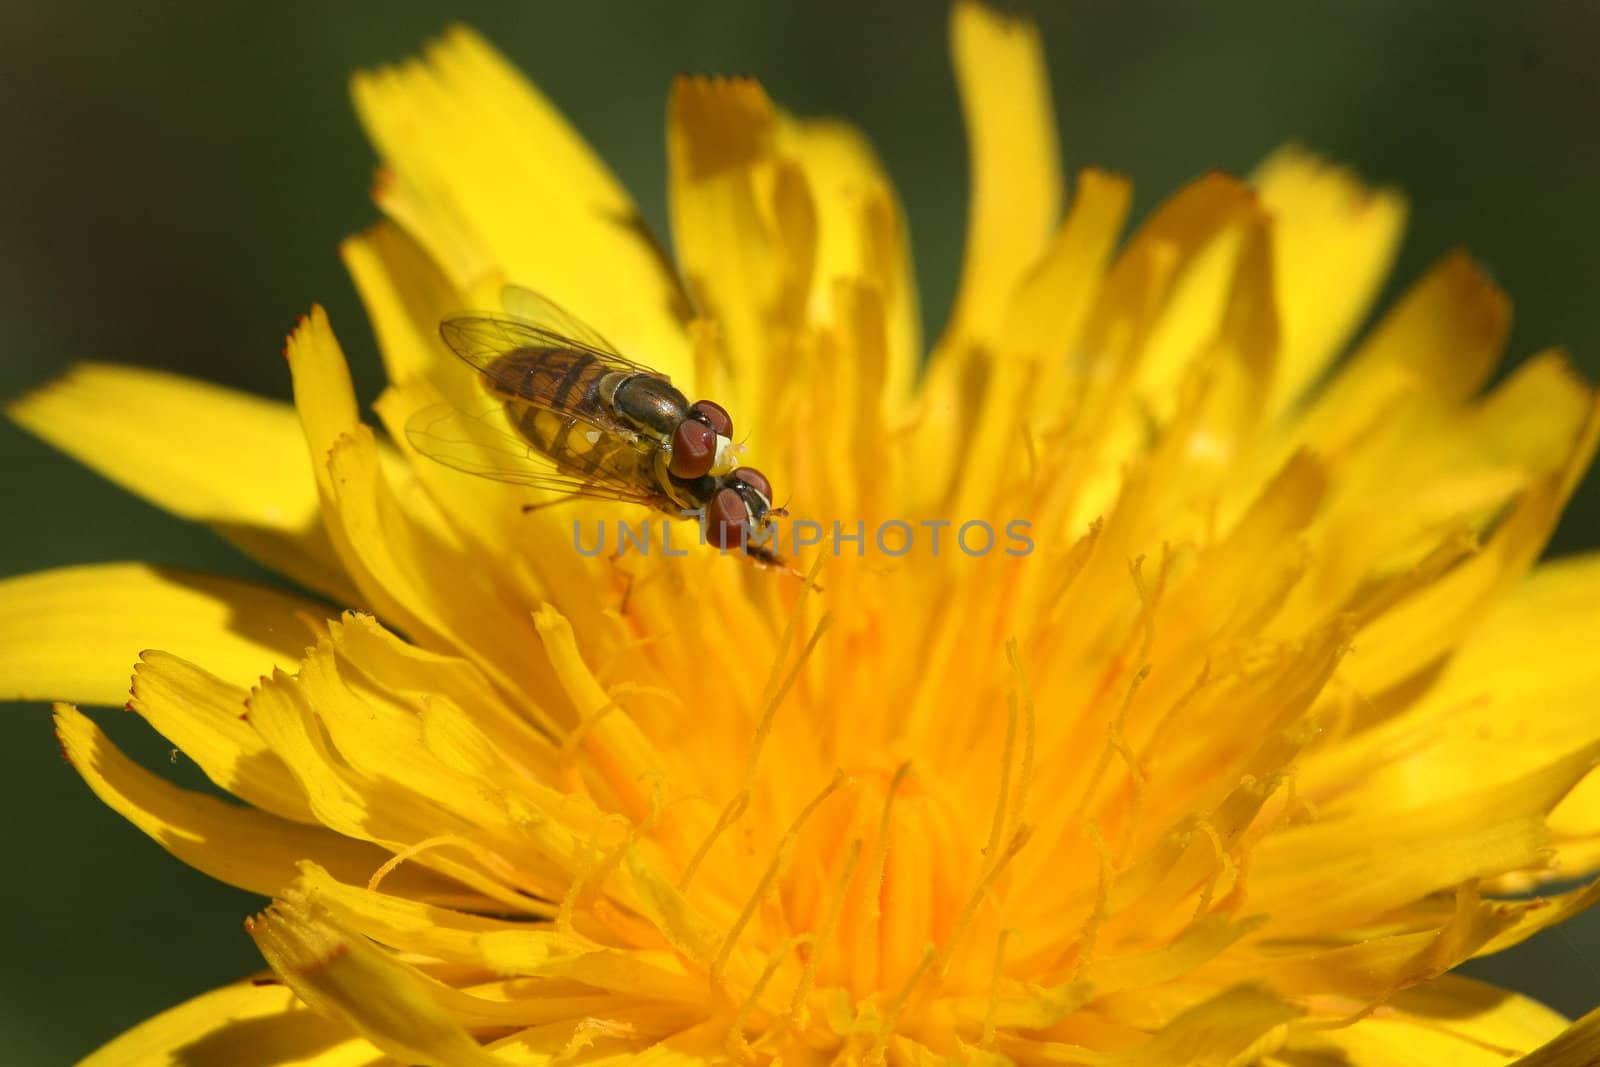 Flying insects mating on a flower